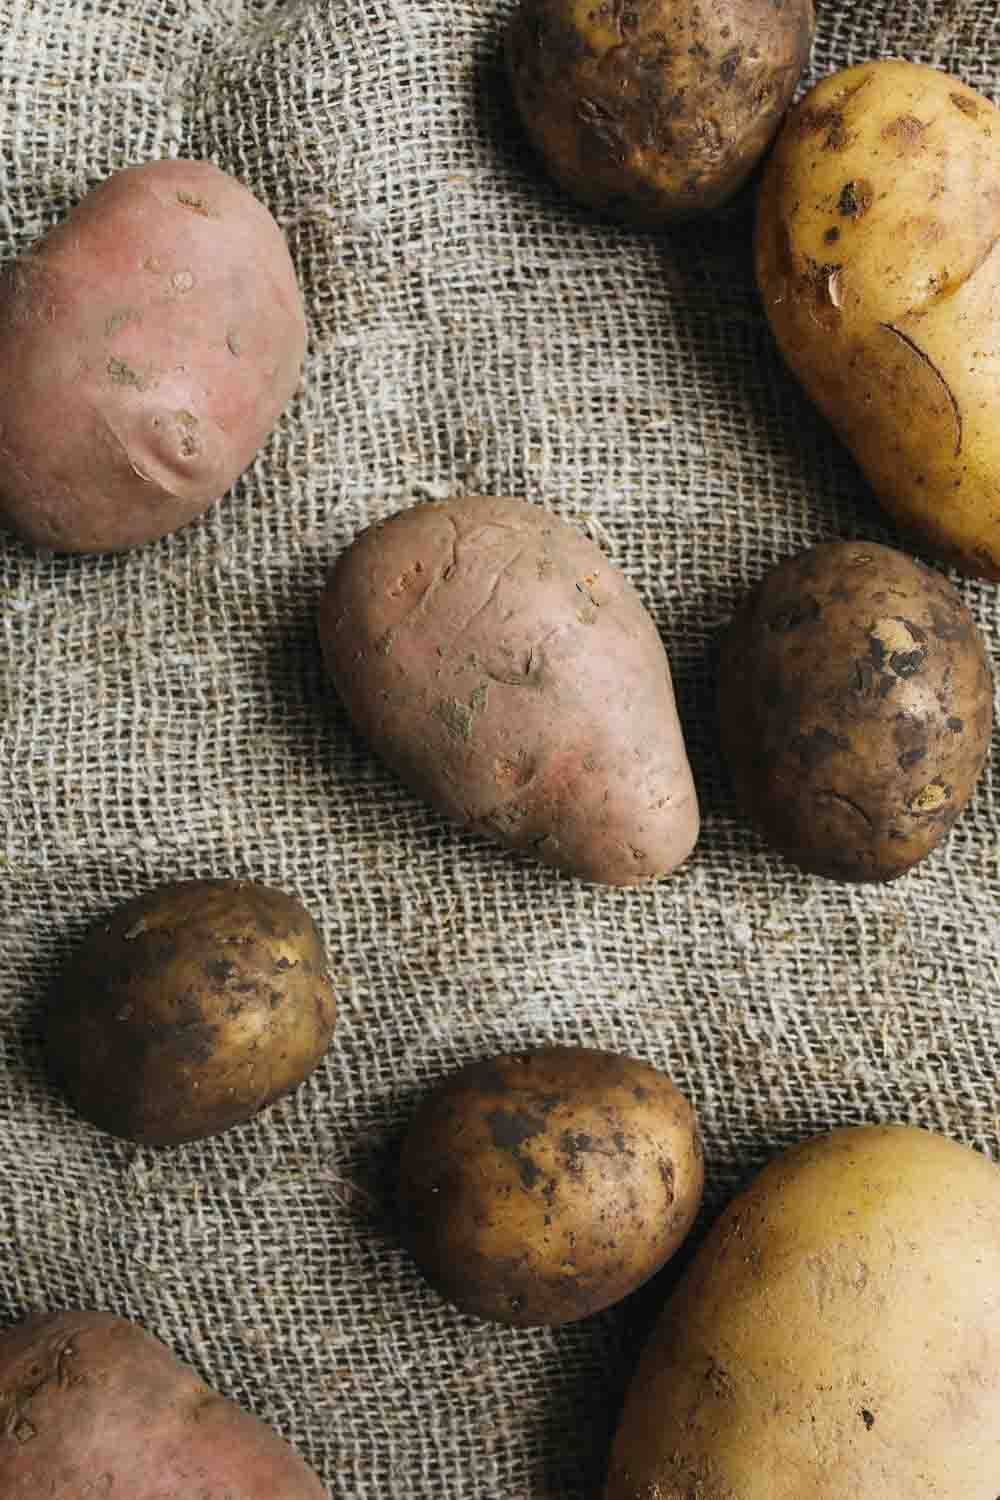 Sweet potatoes and normal potatoes together